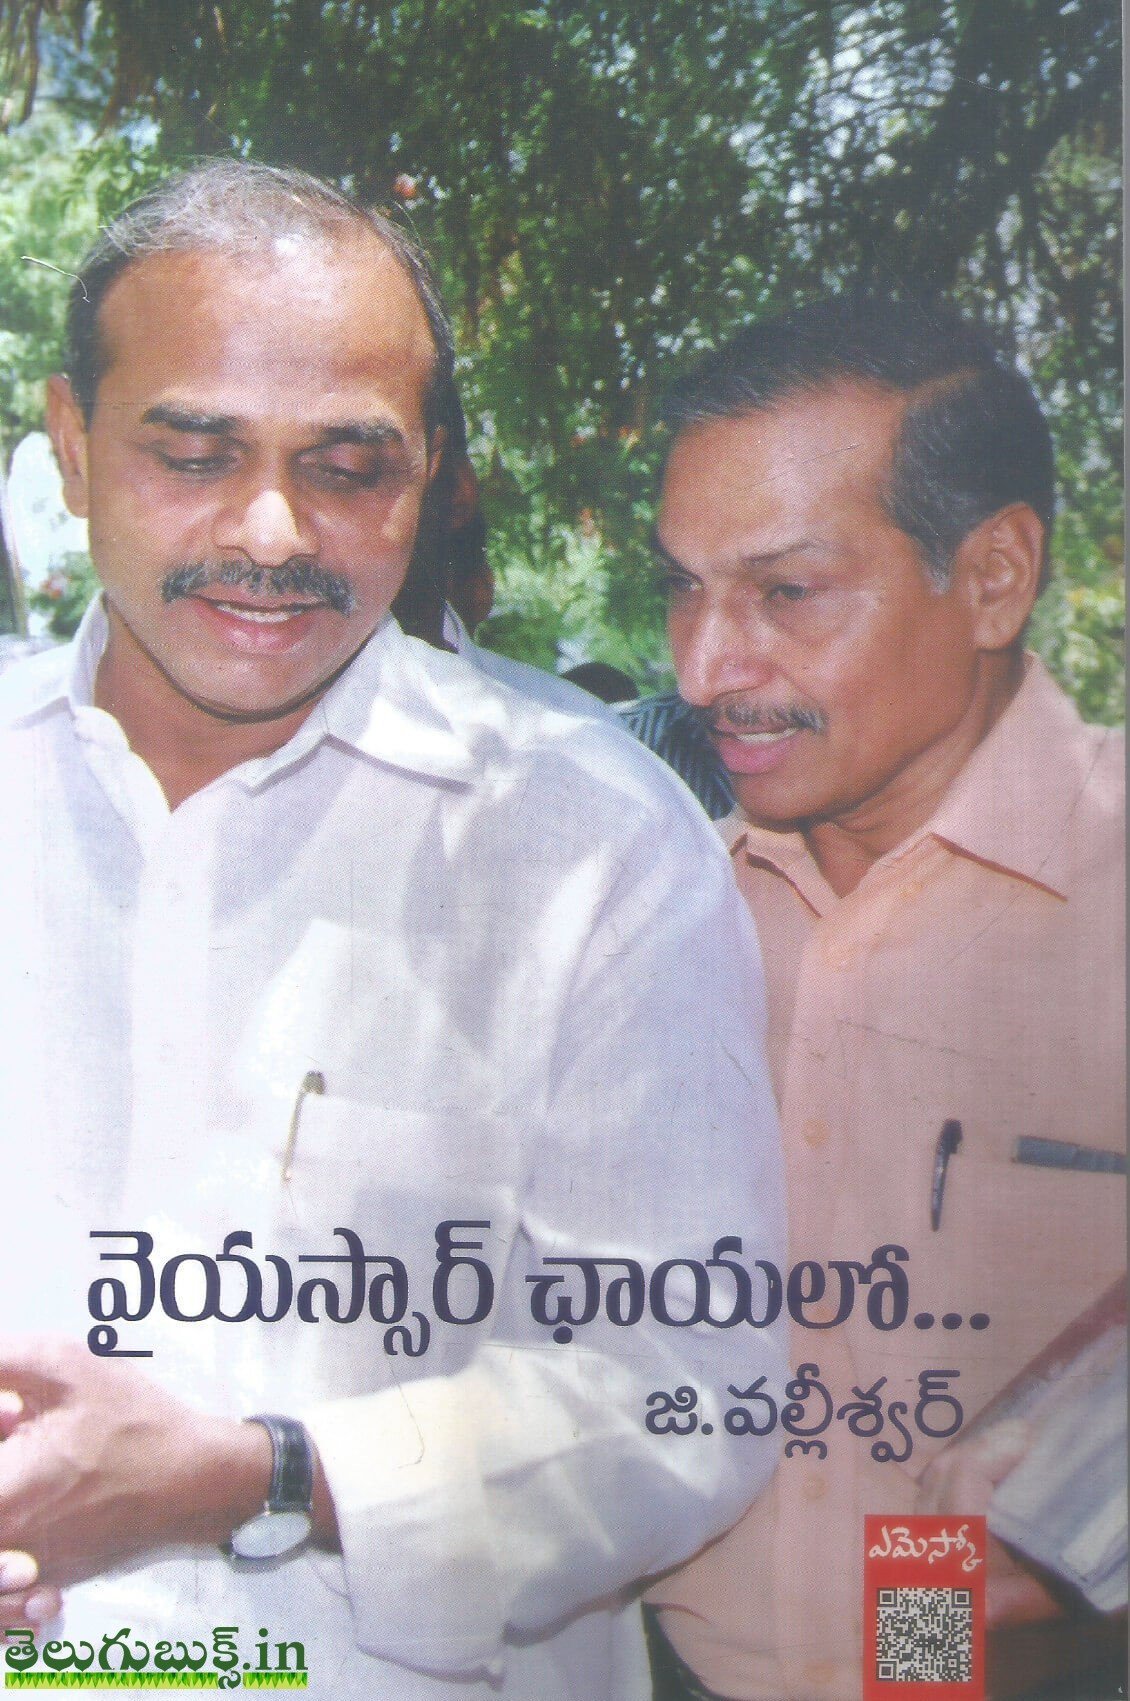 Rich tributes paid to YSR on his Jayanthi